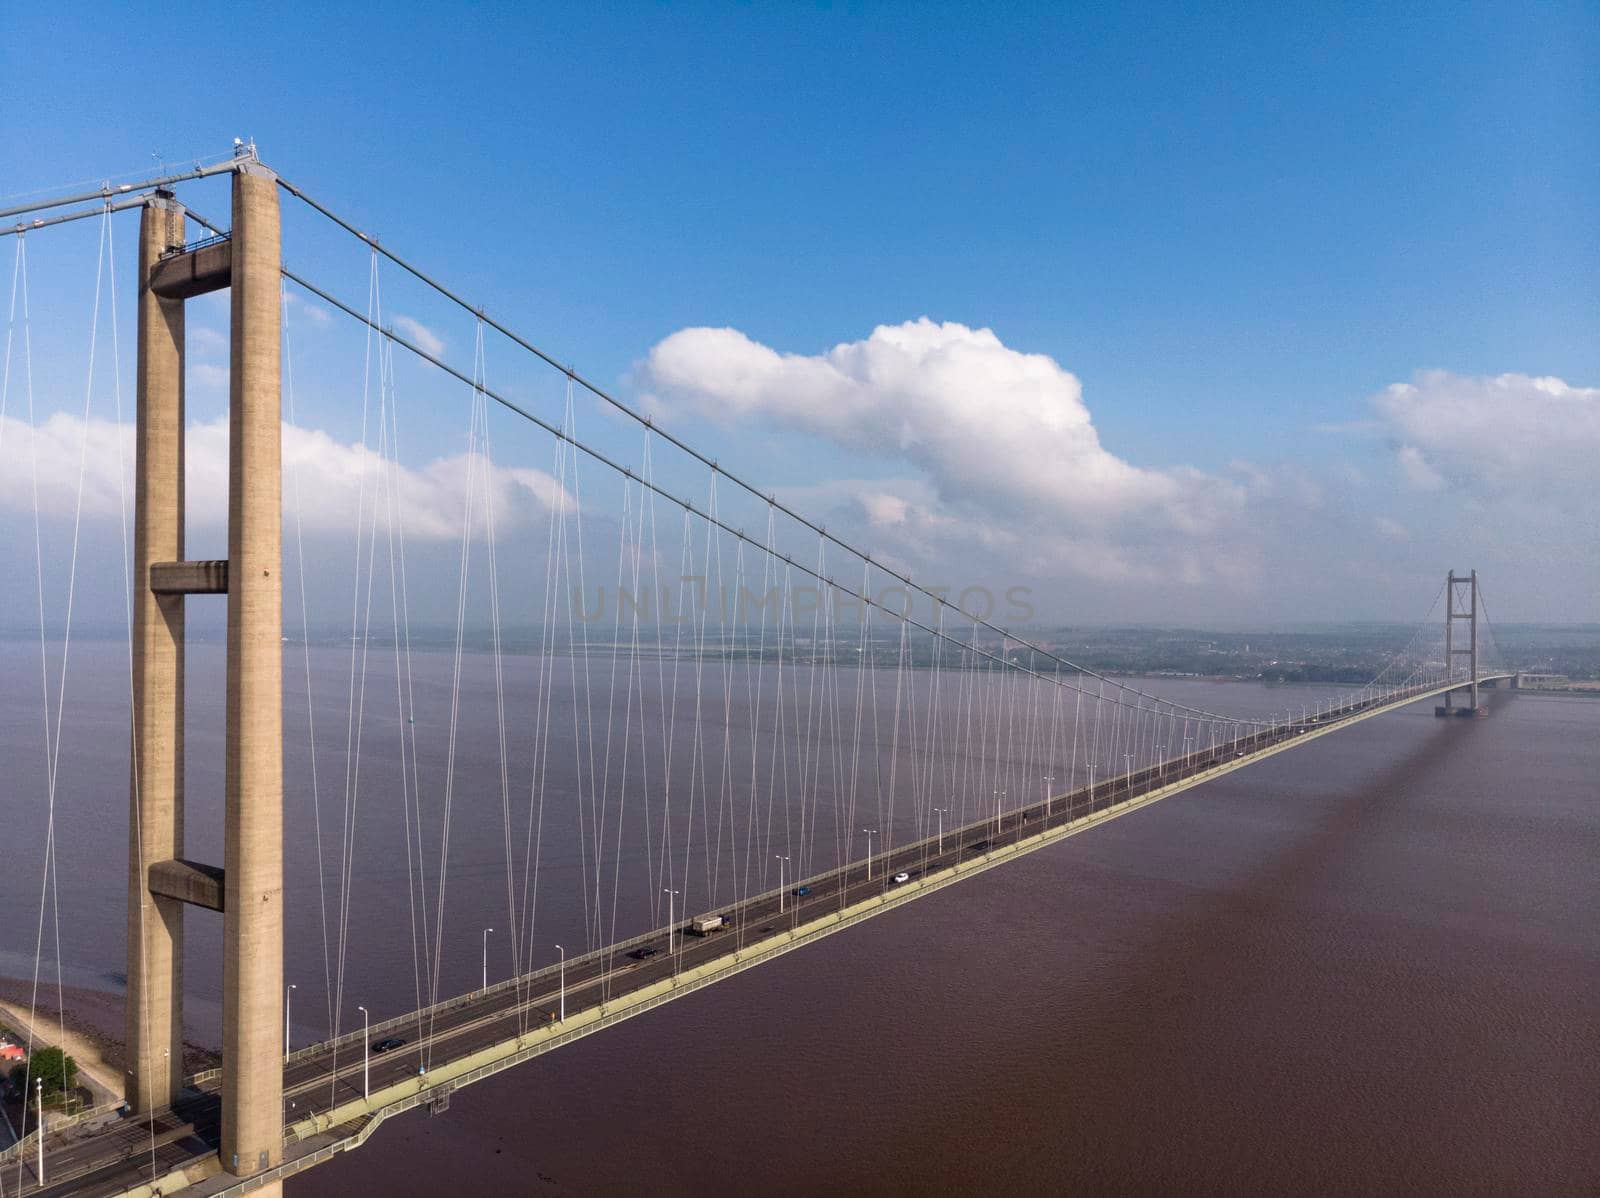 Impressive drone shot high up of suspension Humber Bridge, Yorksire by StefanMal